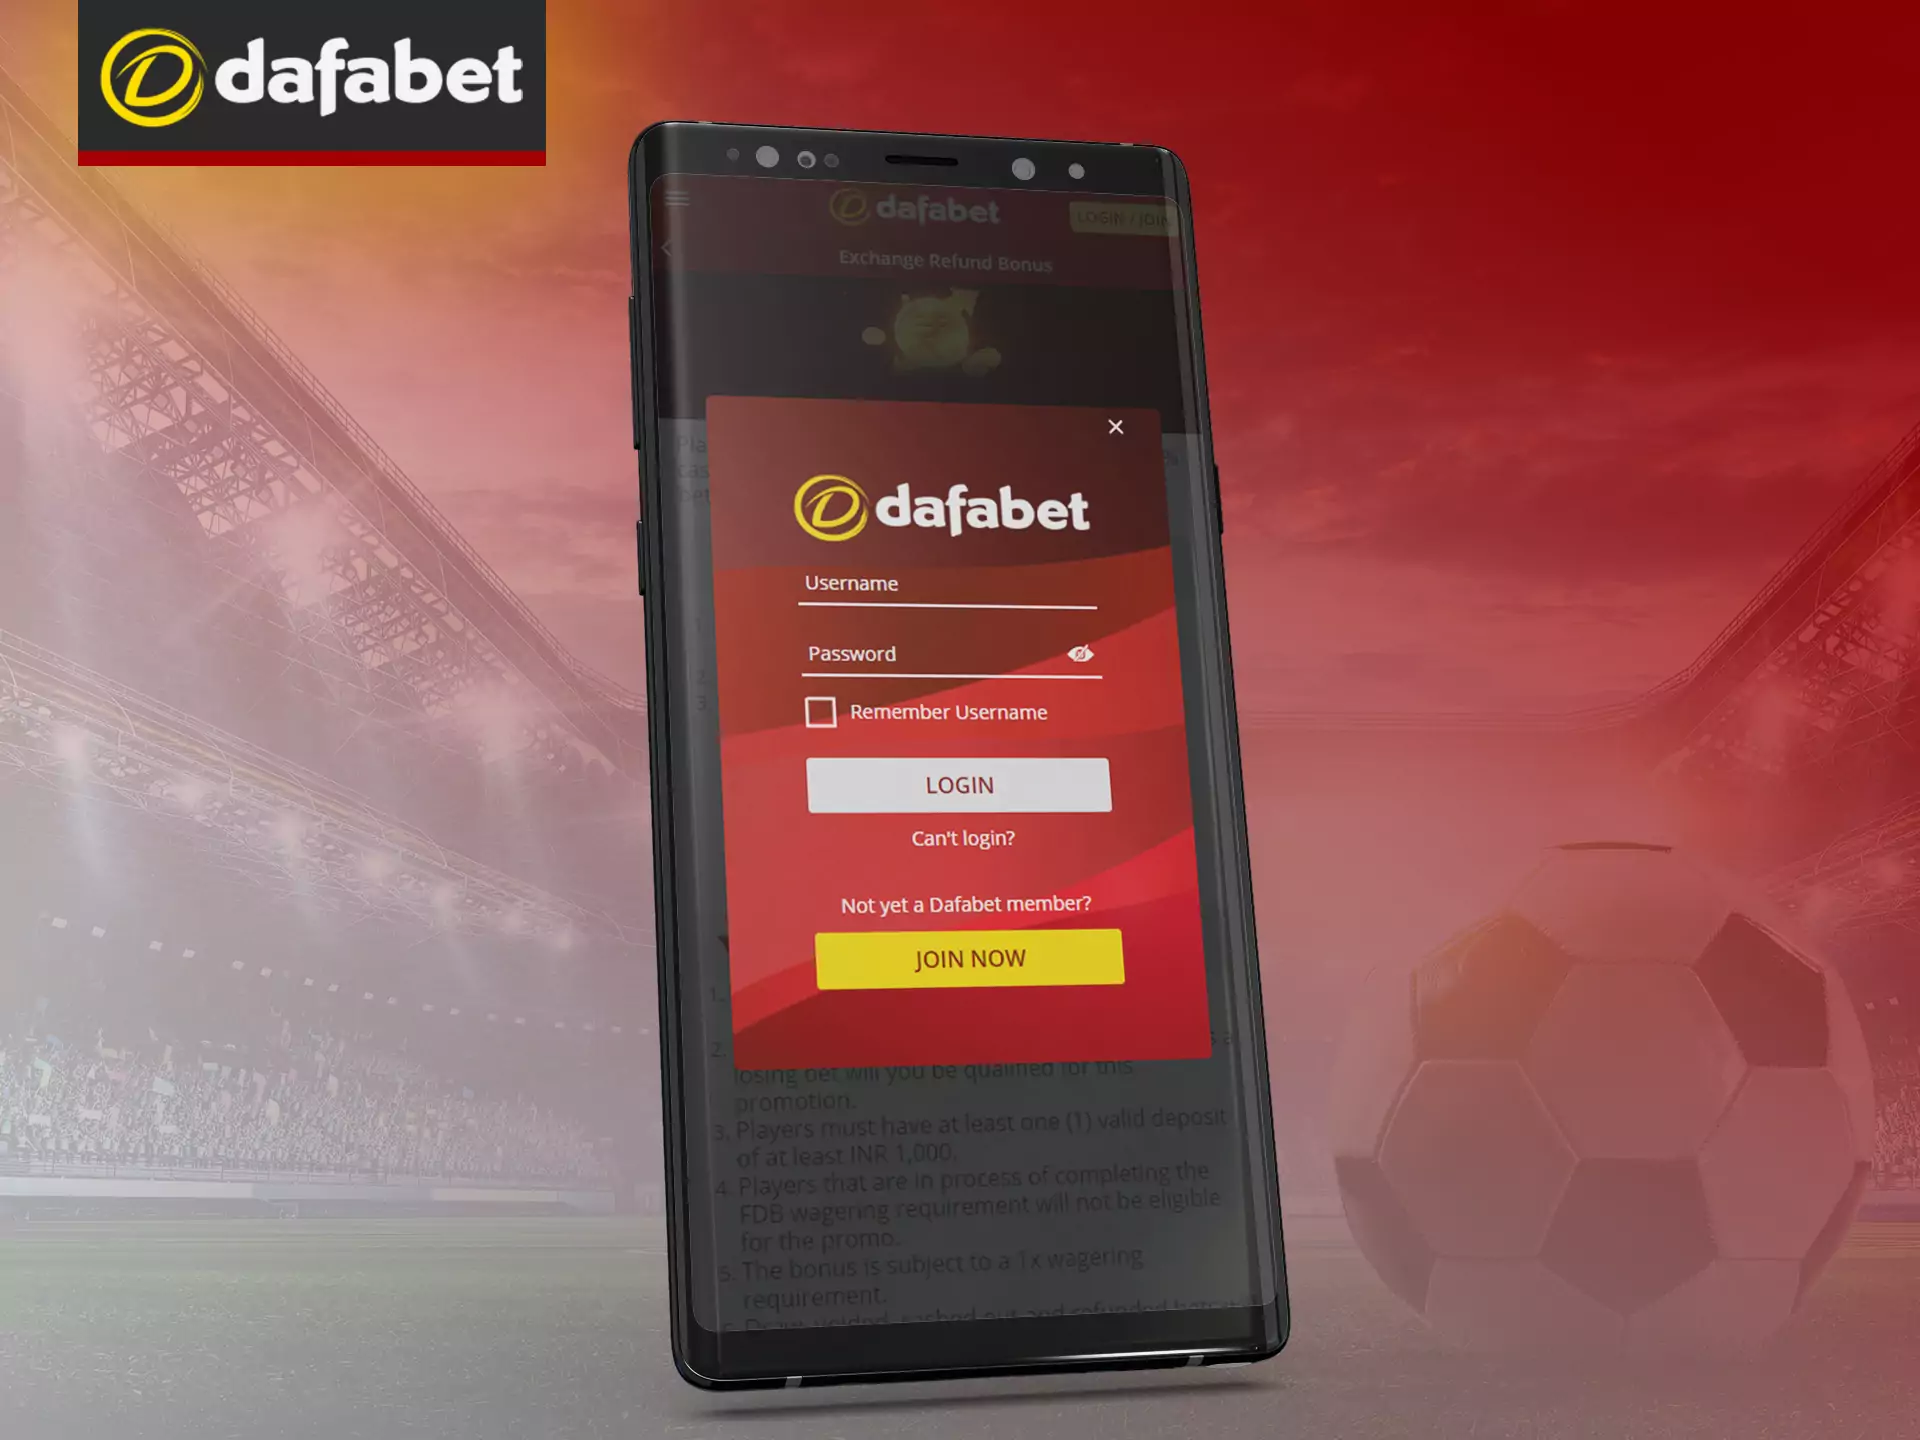 Log in and start betting using Dafabet app.